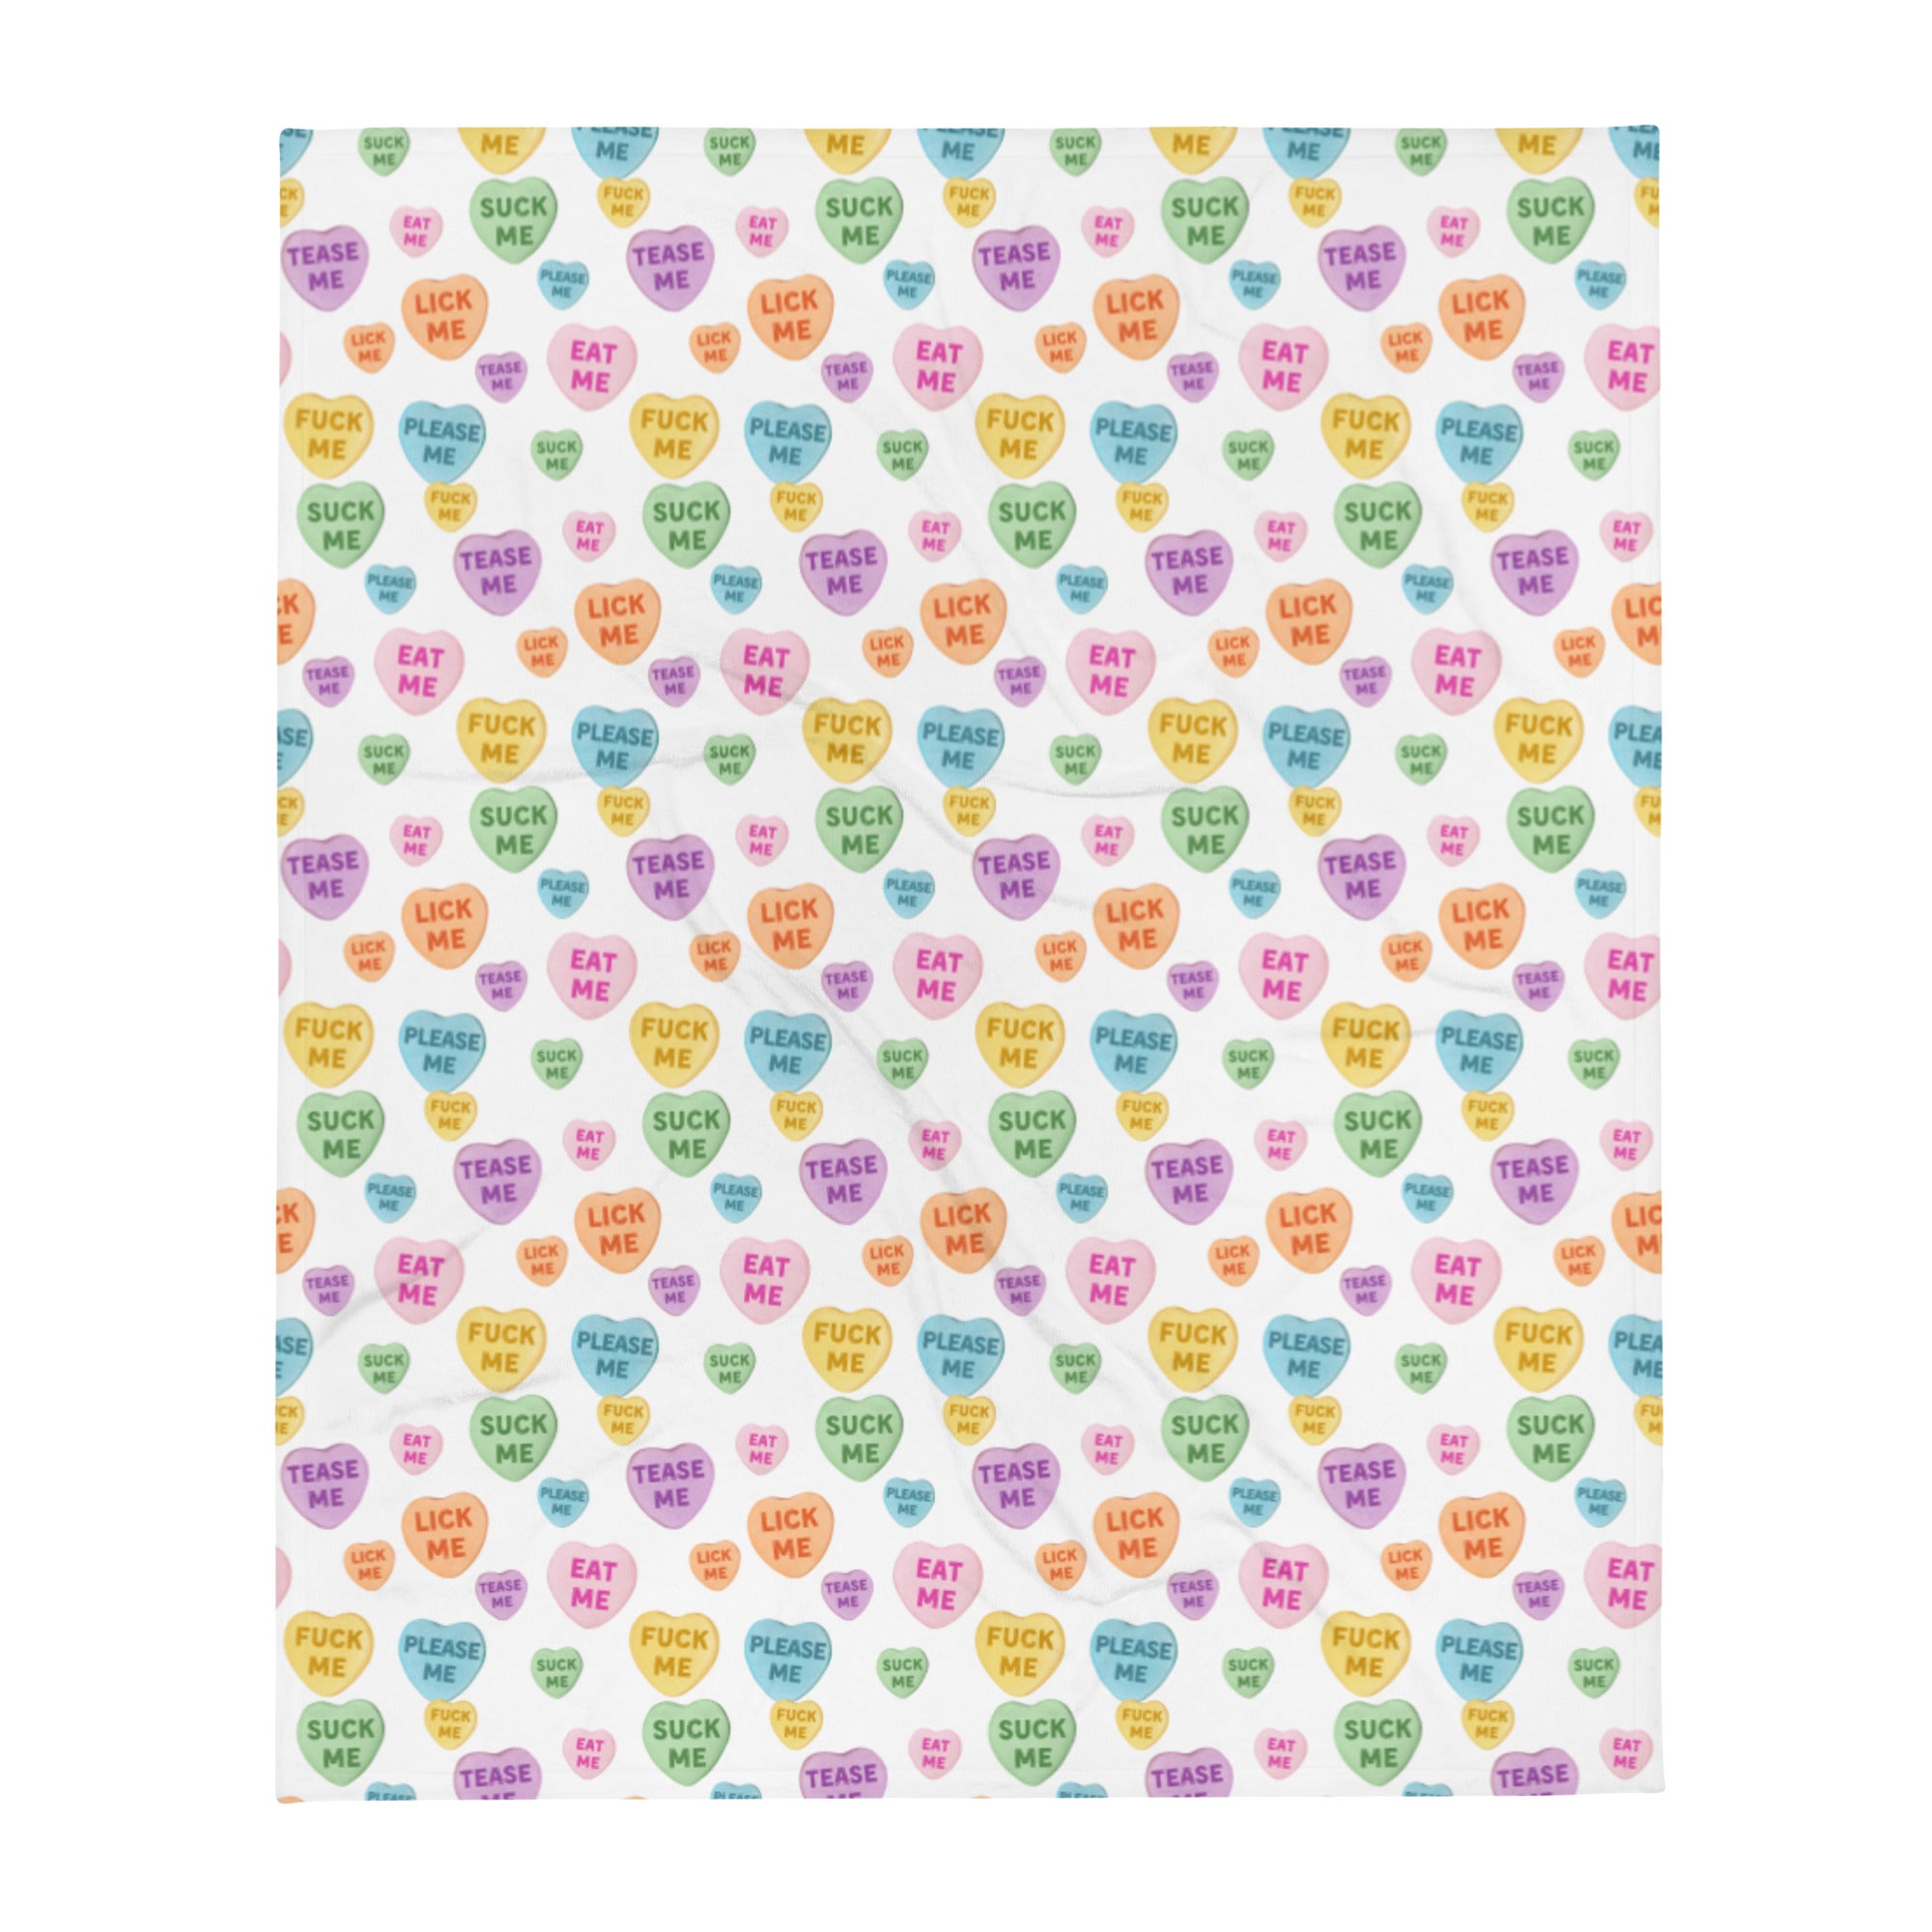 Naughty Valentine's Candy Hearts Throw Blanket